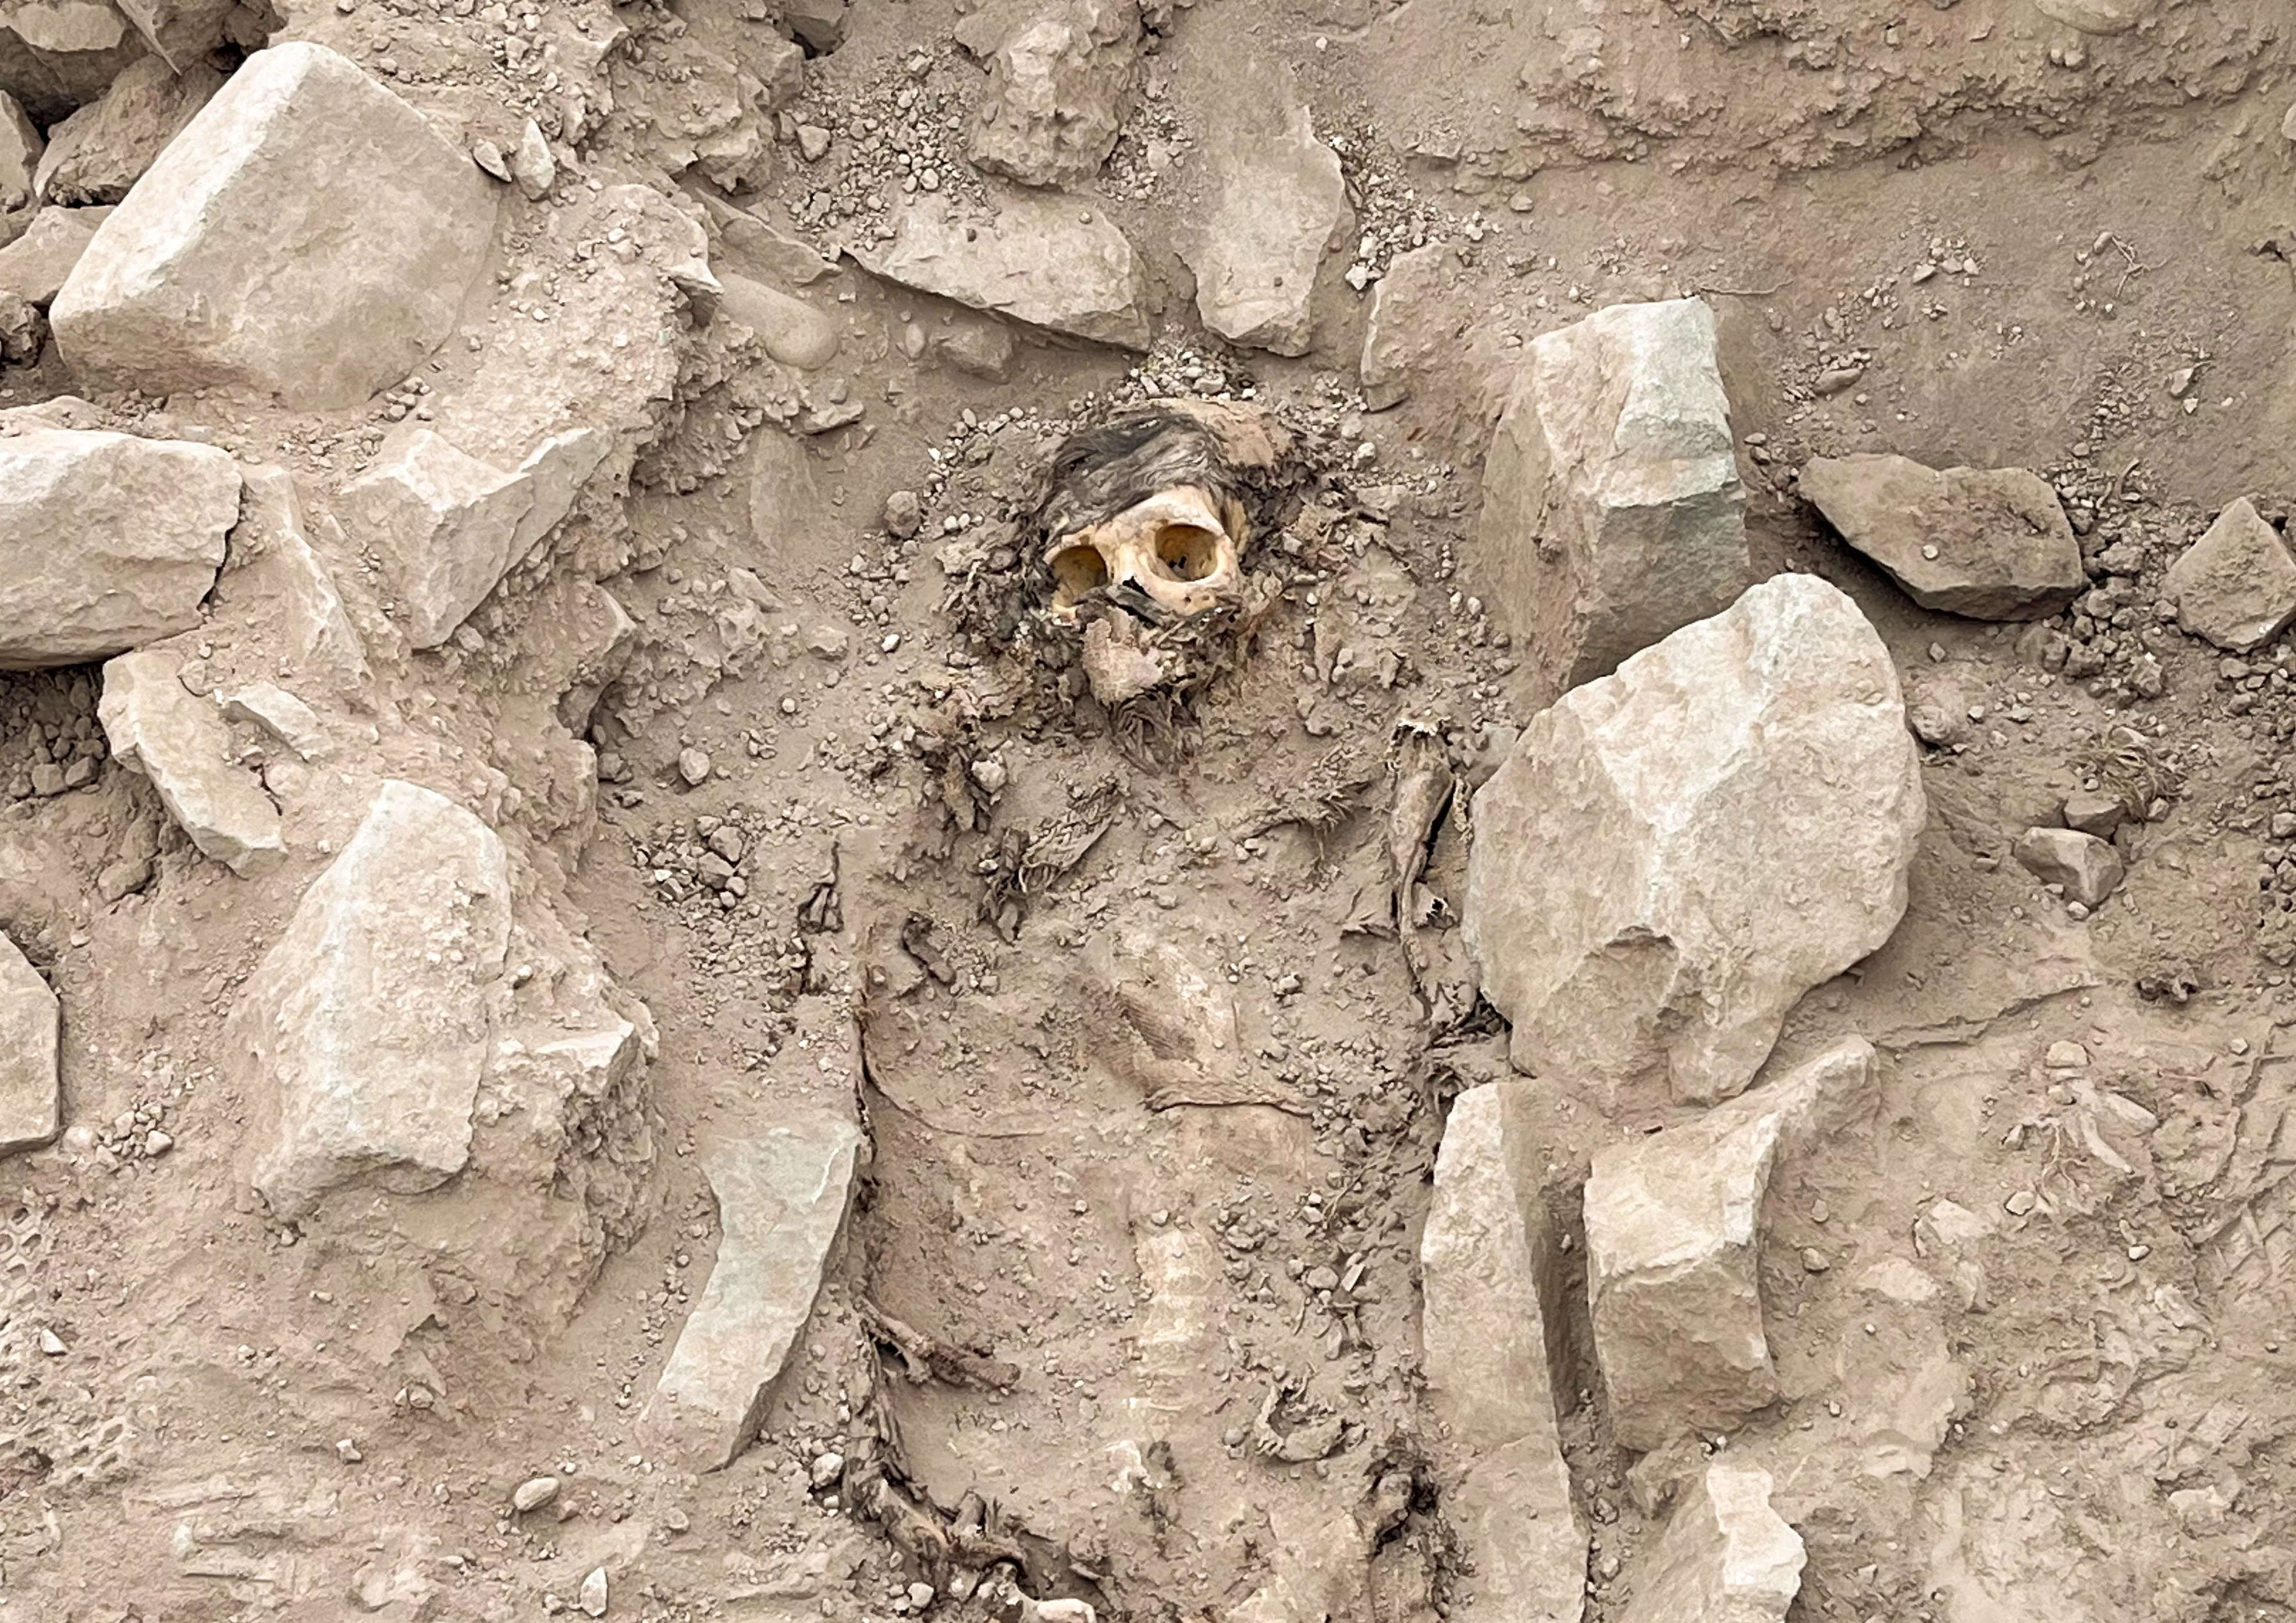 3000 year old peruvian mummy found under trash dump may have been left as a sacrifice